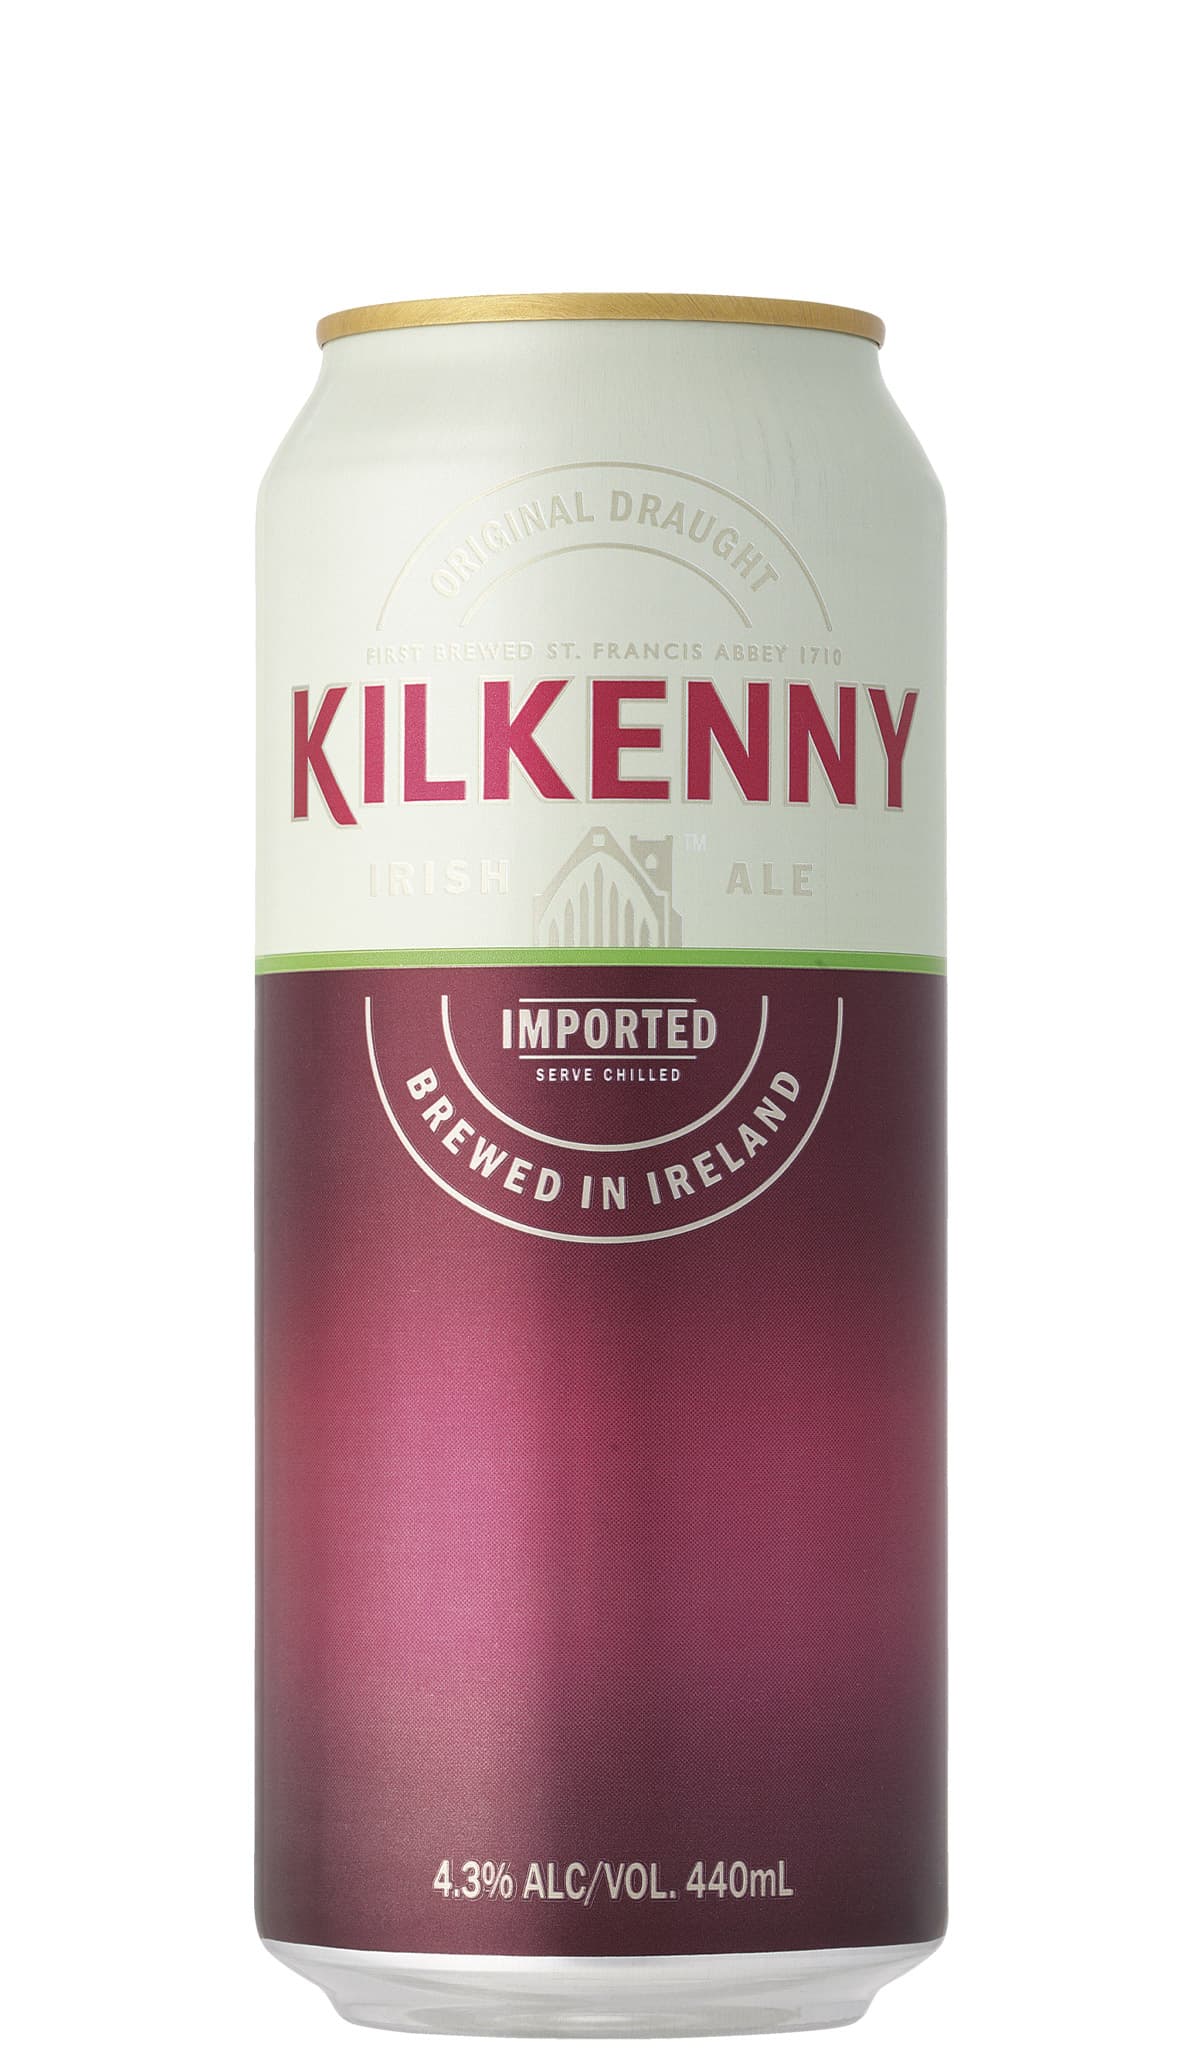 Find out more, explore the range & purchase Kilkenny Draught beer online at Wine Sellers Direct - Australia's independent liquor specialists.